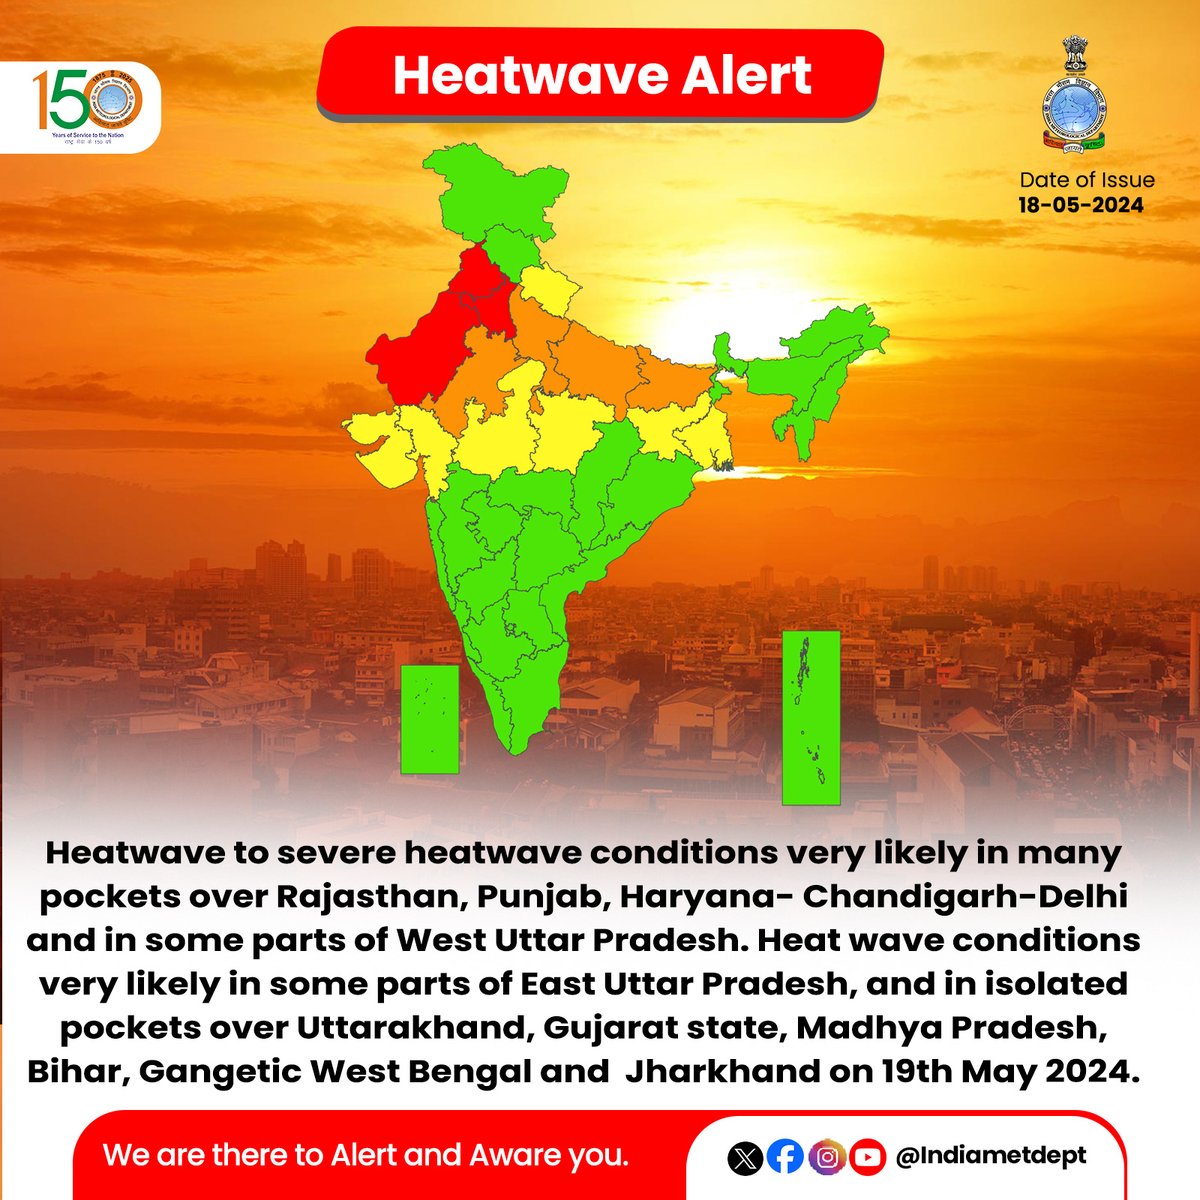 Heatwave to severe heatwave conditions very likely in many pockets over Rajasthan, Punjab, Haryana- Chandigarh-Delhi  and in some parts of West Uttar Pradesh. Heat wave conditions very likely in some parts of East Uttar Pradesh, and in isolated pockets over Uttarakhand,